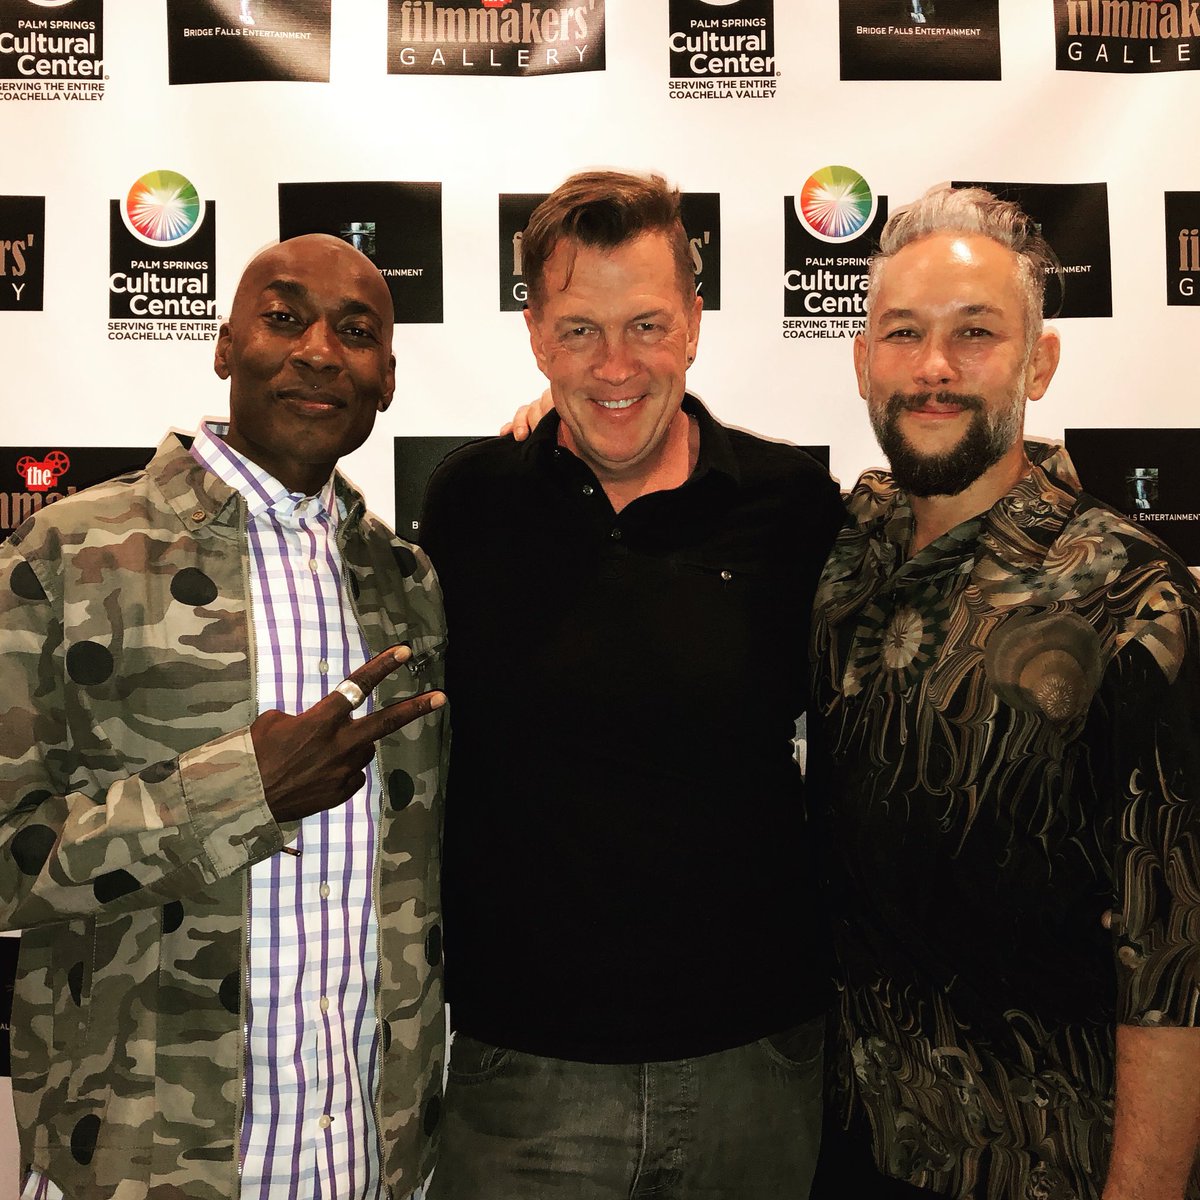 .@CarltonWilborn (left) and .@KevinStea (right) known to millions in .@Madonna ‘s Truth or Dare bare their souls in .@StrikeAPoseDocu ... seen here with .@promohomotv Producer/Host #NicholasSnow